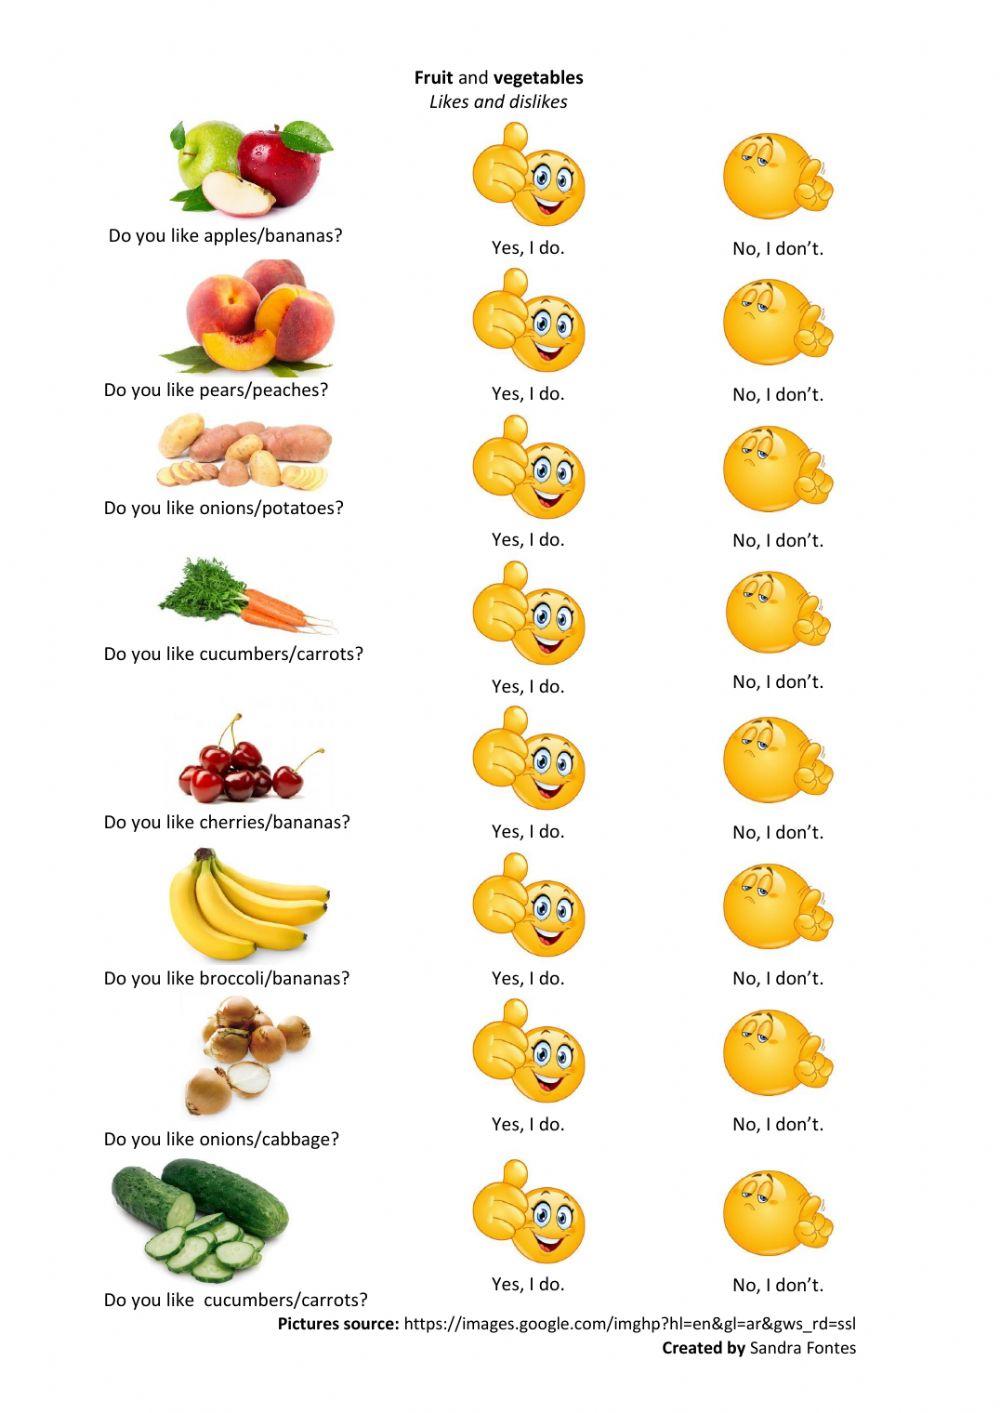 Likes and dislikes - fruits and vegetables